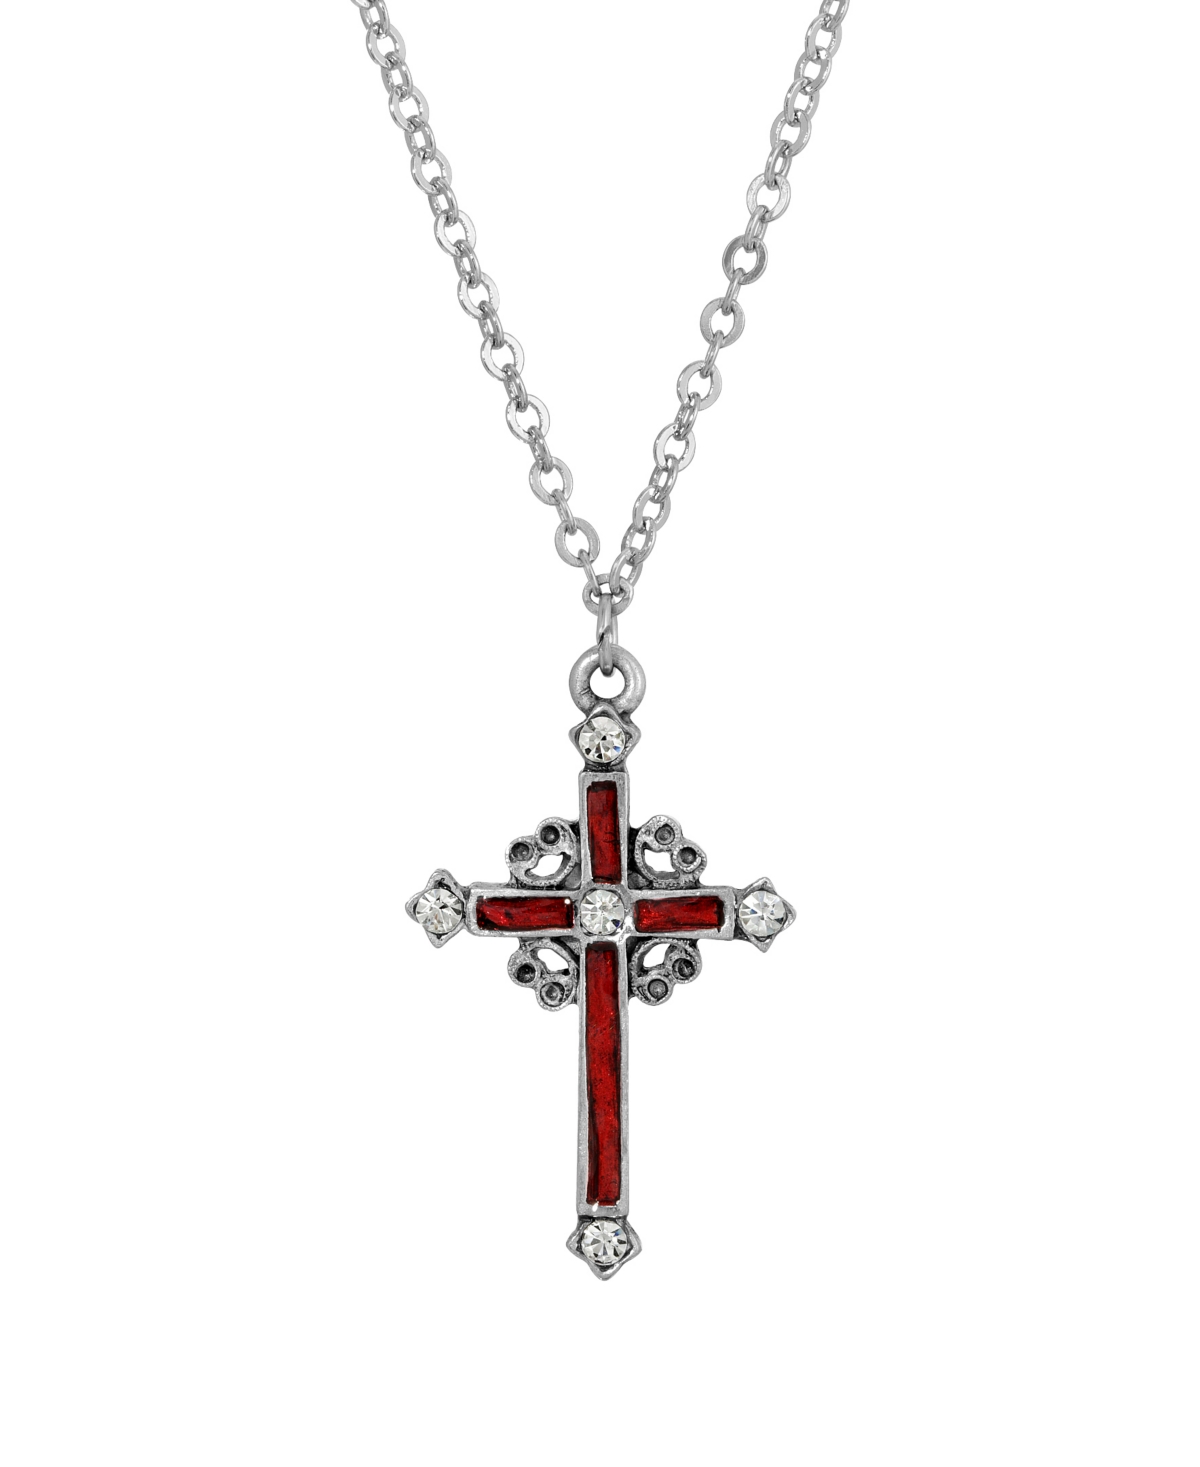 Pewter Red Hand Enamel Cross with Crystals Necklace - Red